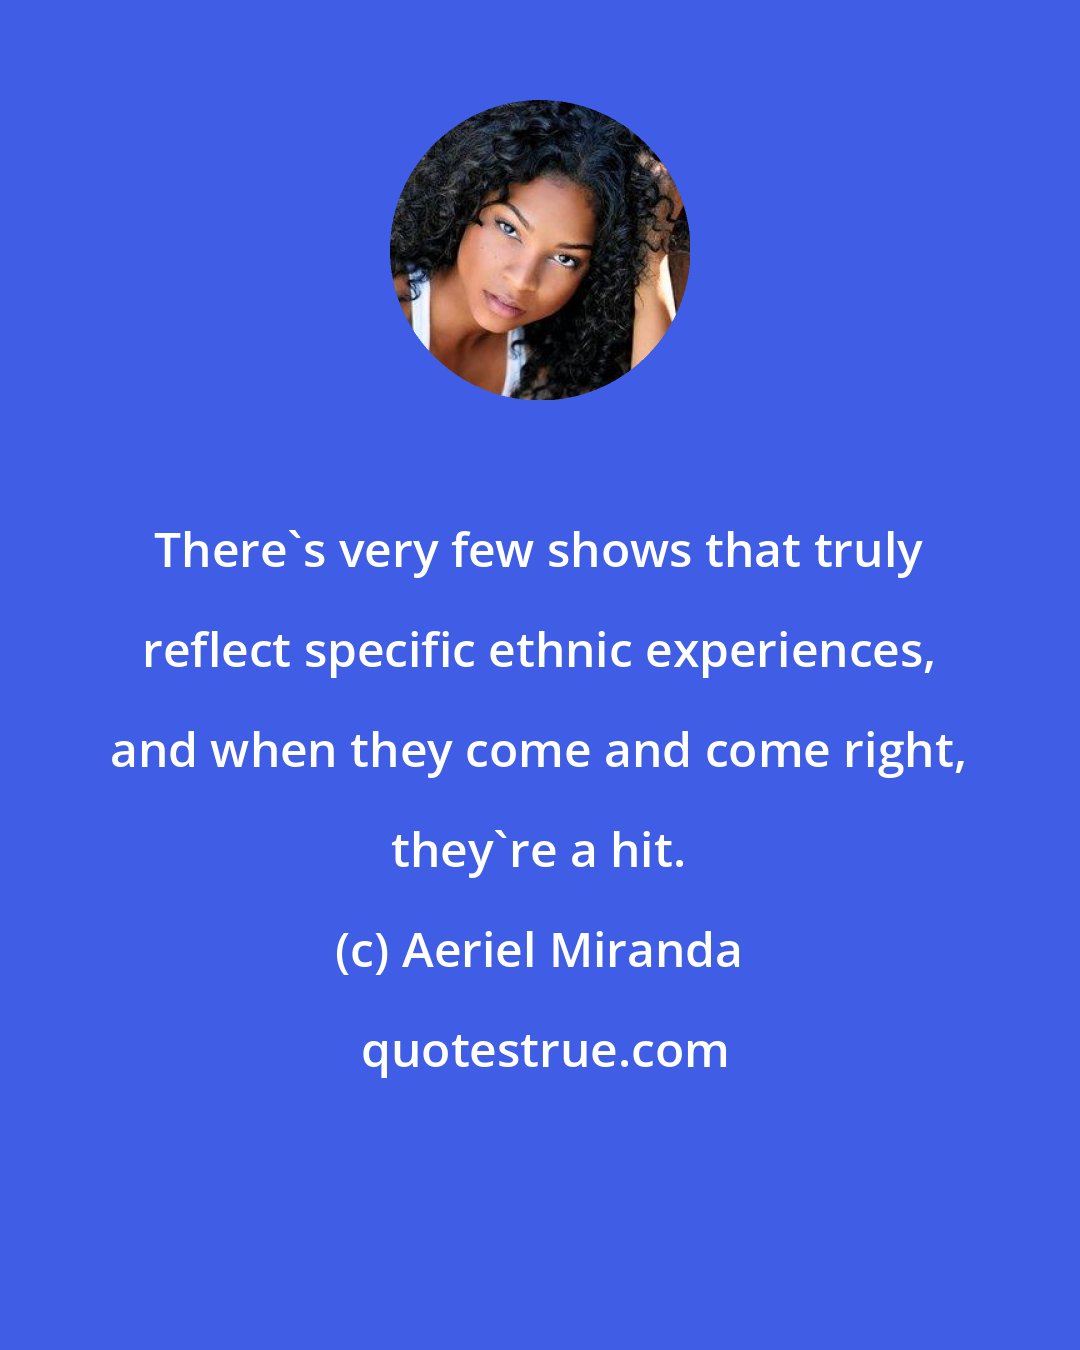 Aeriel Miranda: There's very few shows that truly reflect specific ethnic experiences, and when they come and come right, they're a hit.